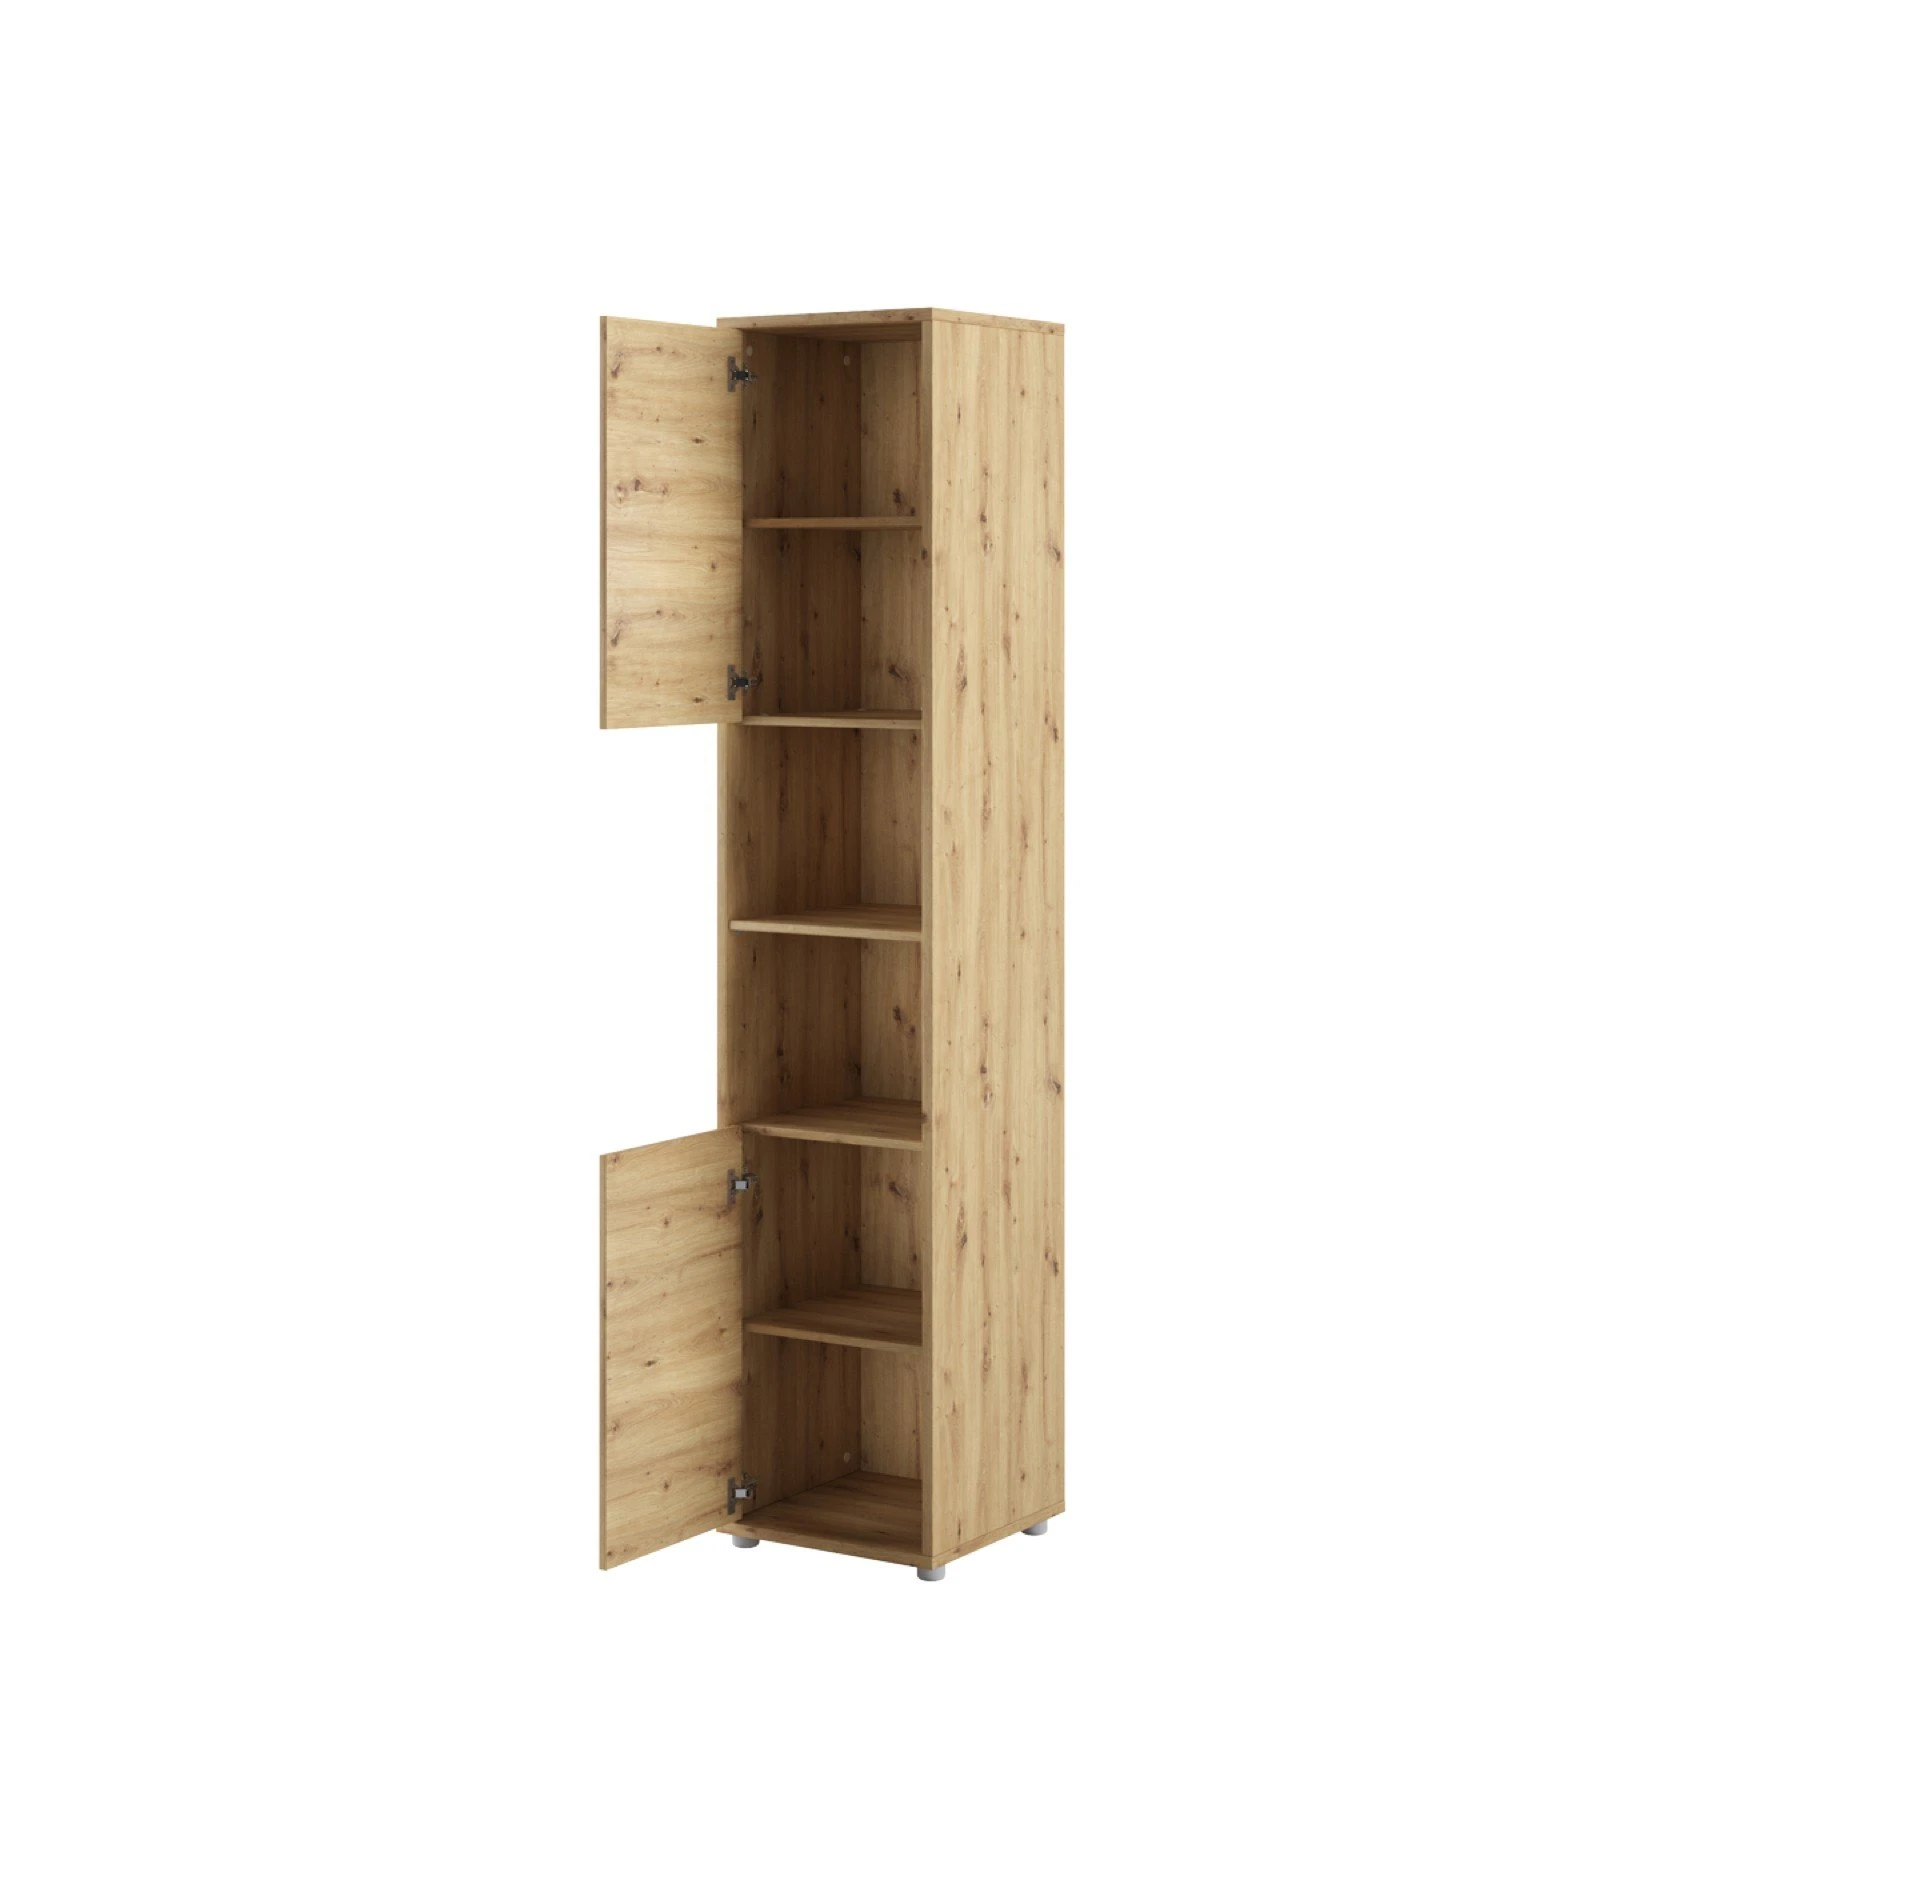 BC-08 Tall Storage Cabinet for Vertical Wall Bed Concept-Tall Storage Cabinet